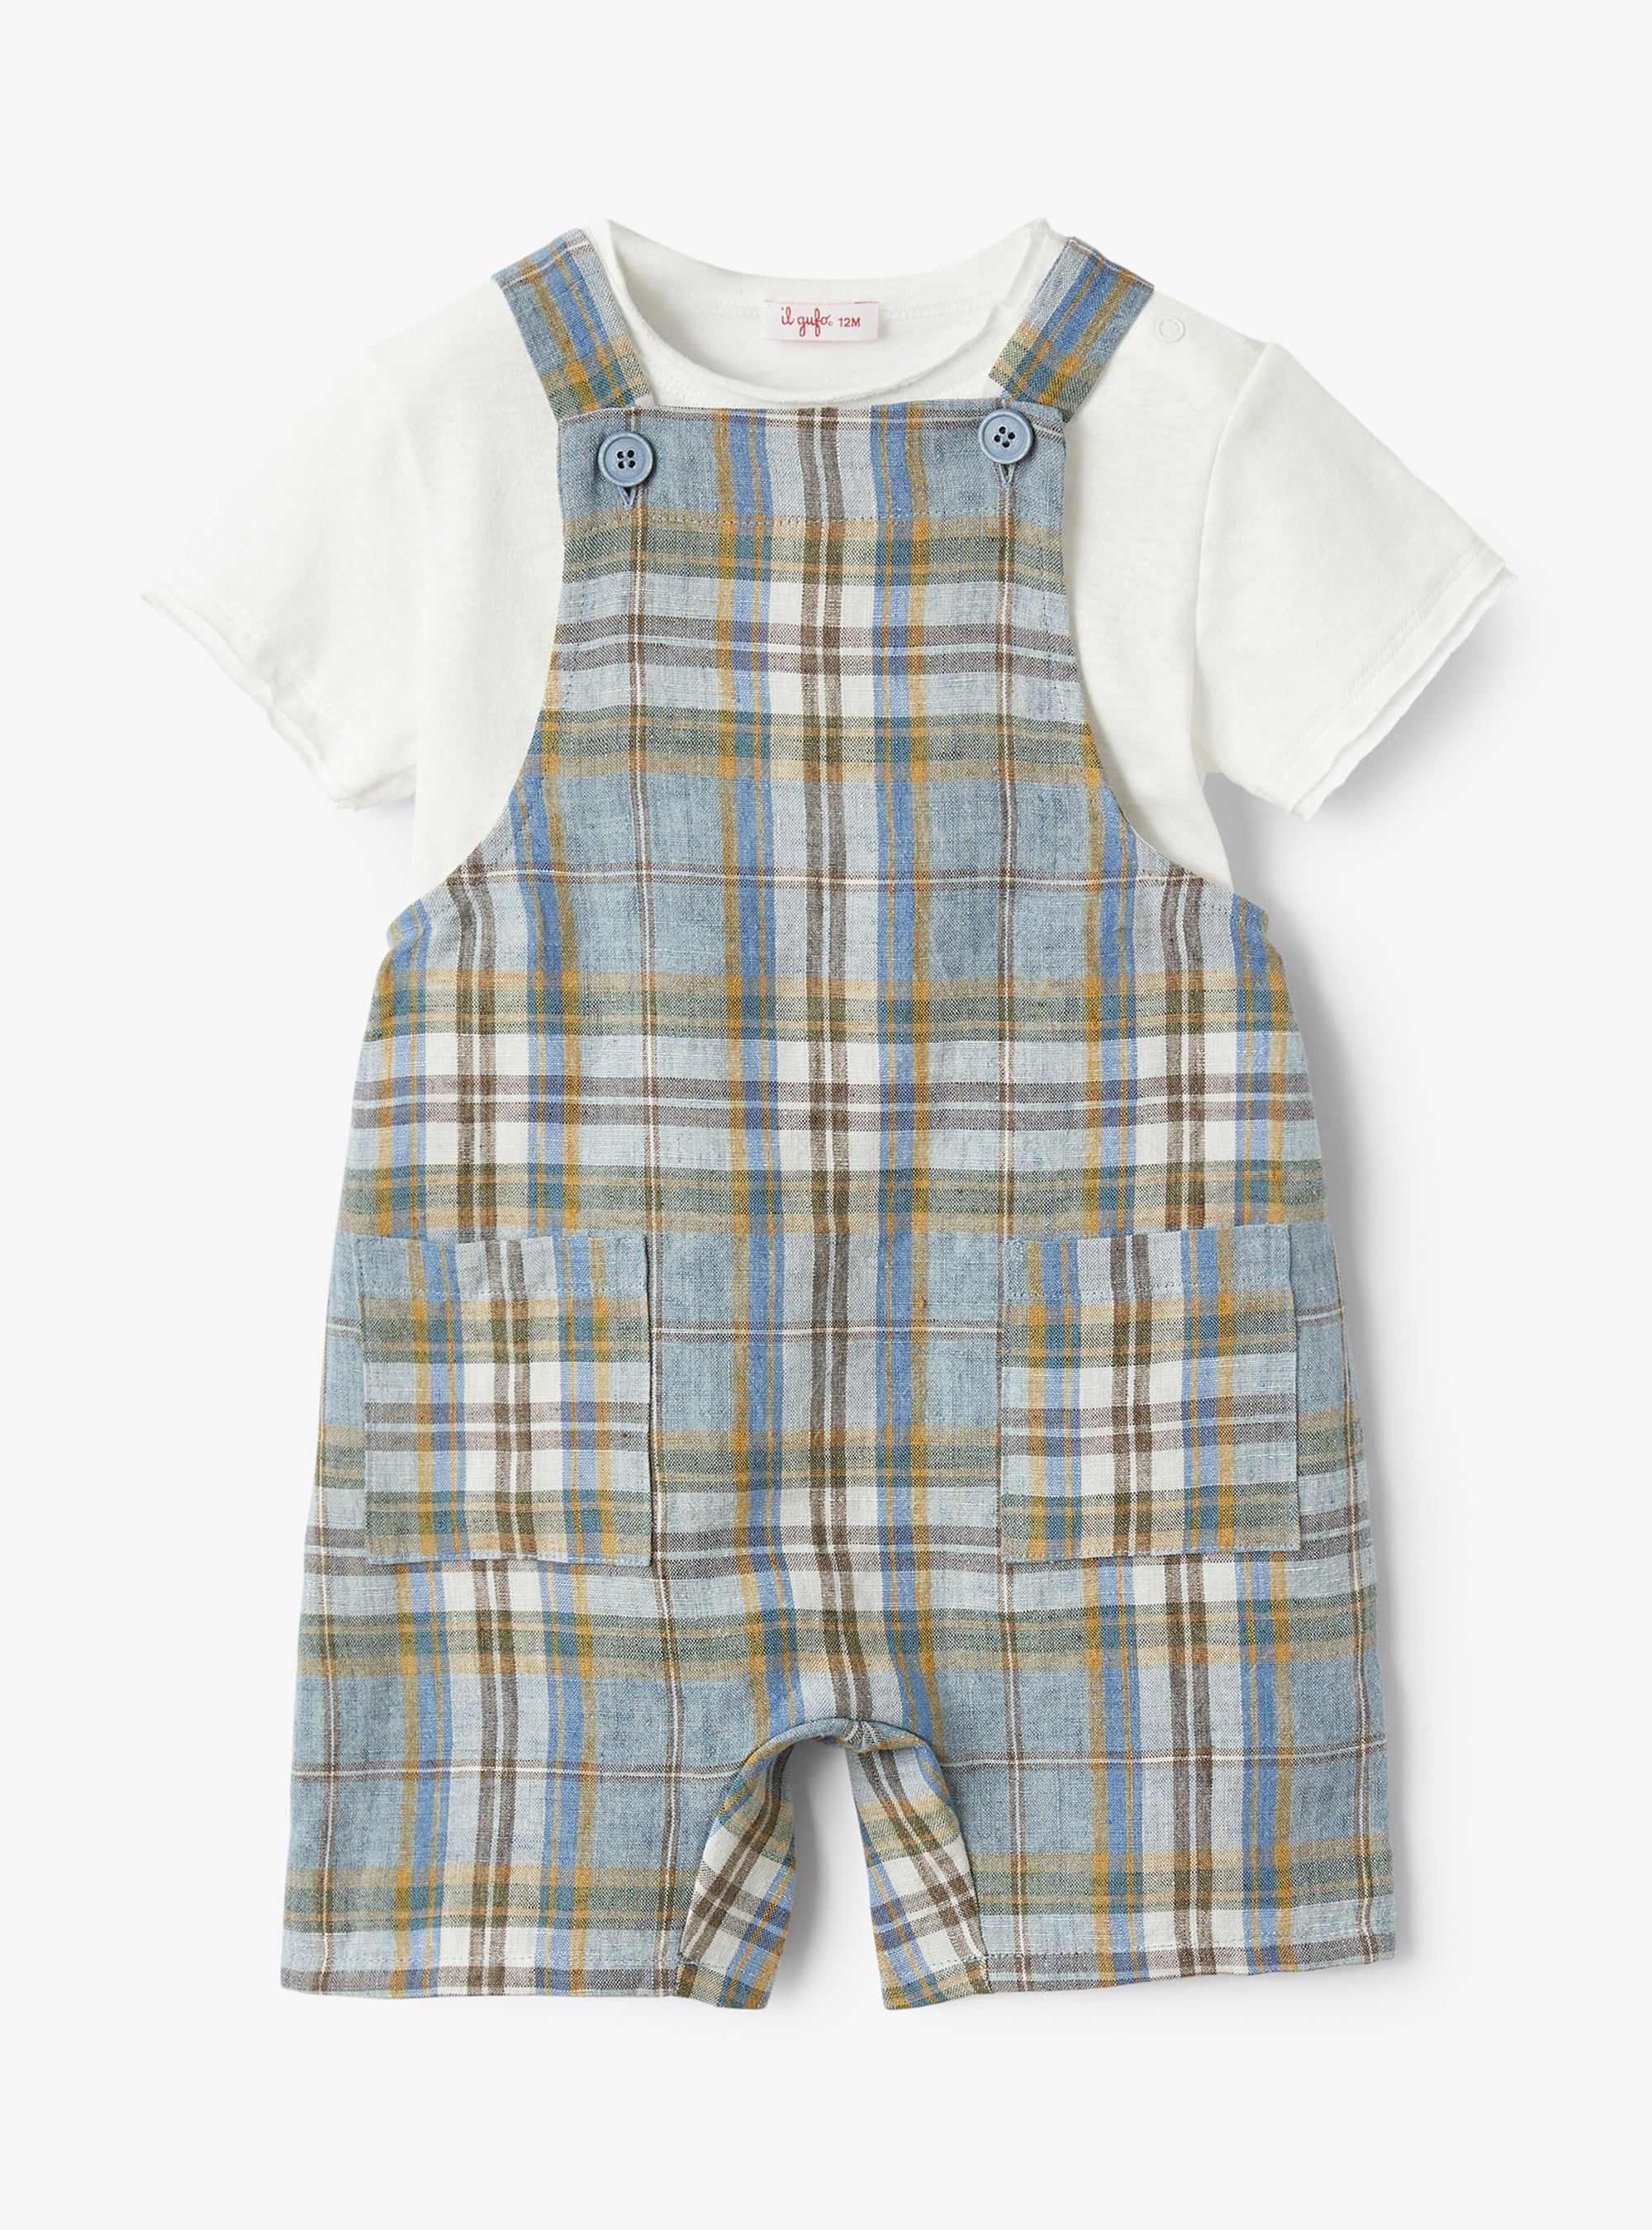 Two-piece set for baby boys with linen dungarees - COMPLETO DUE PEZZI - Il Gufo